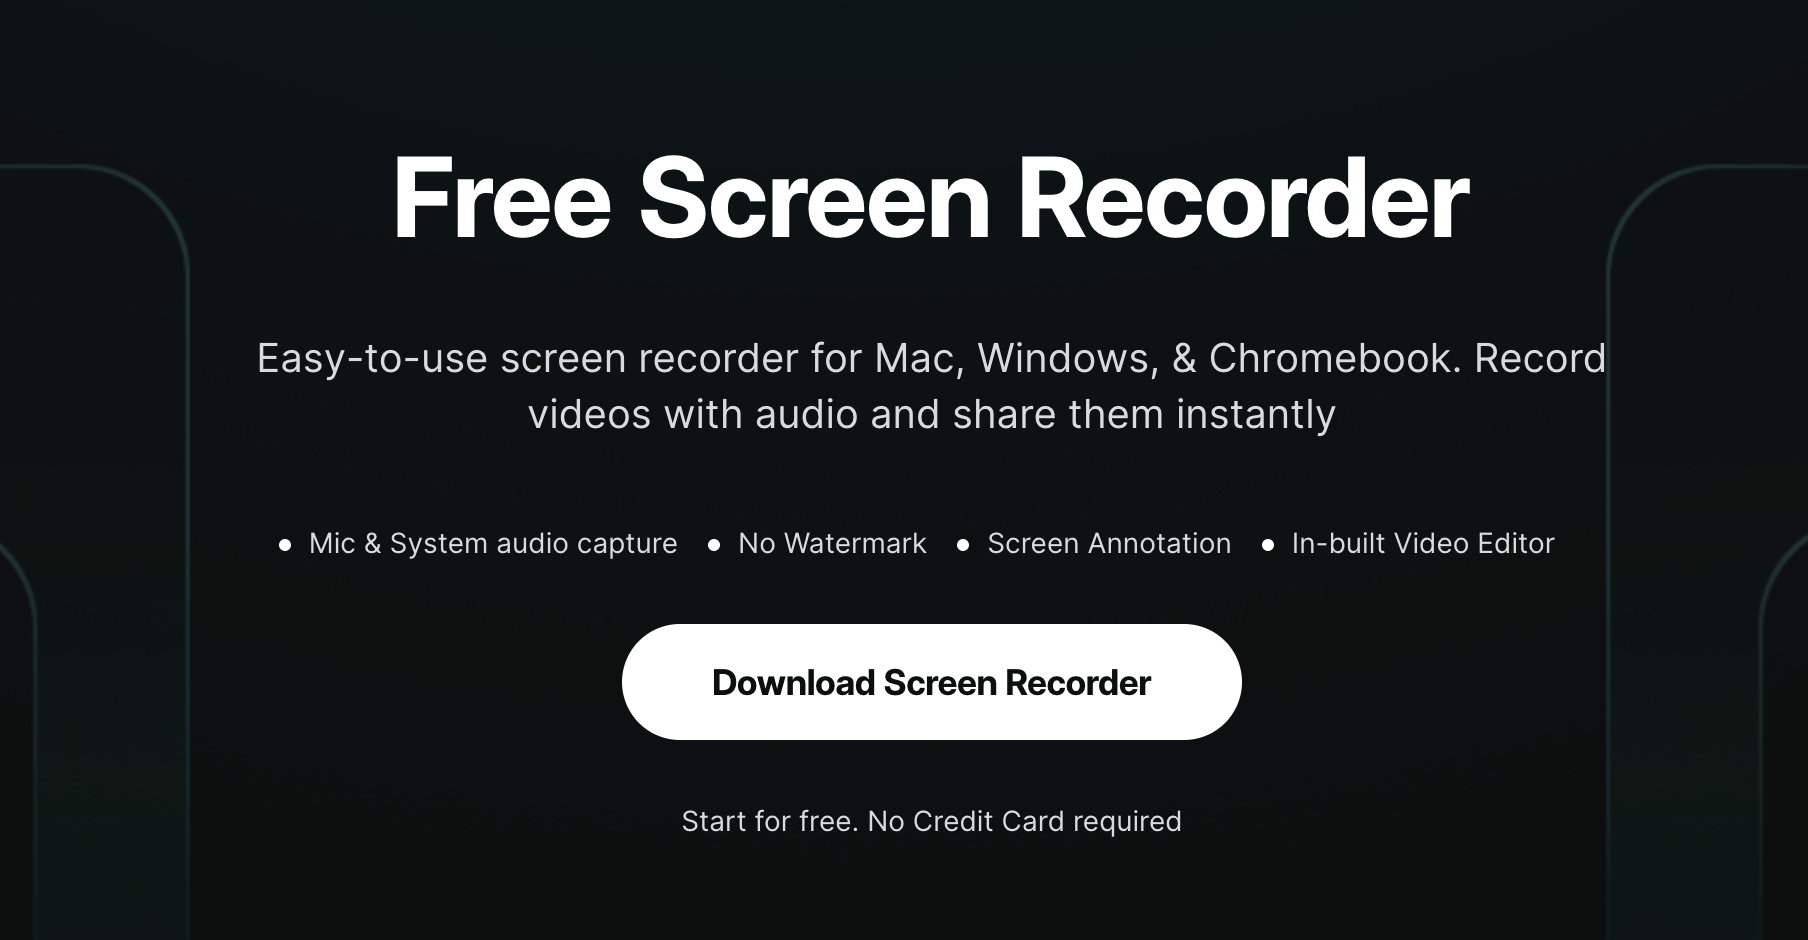 11 Best Free Screen Recorders to Try in 2023